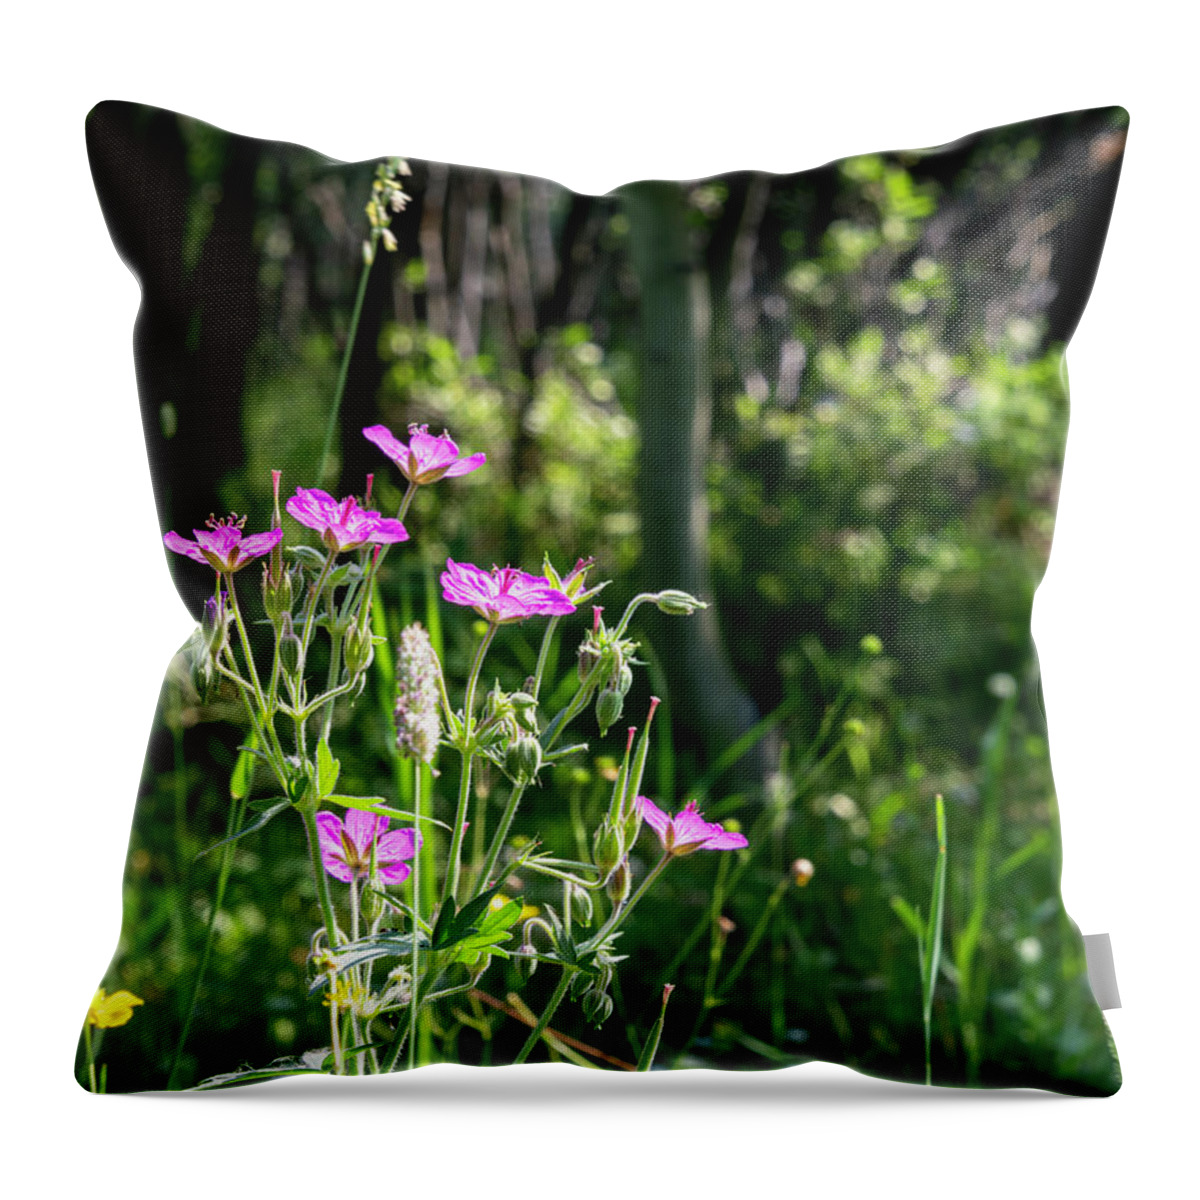 2020-08-01 Throw Pillow featuring the photograph Wild Geranium by Phil And Karen Rispin